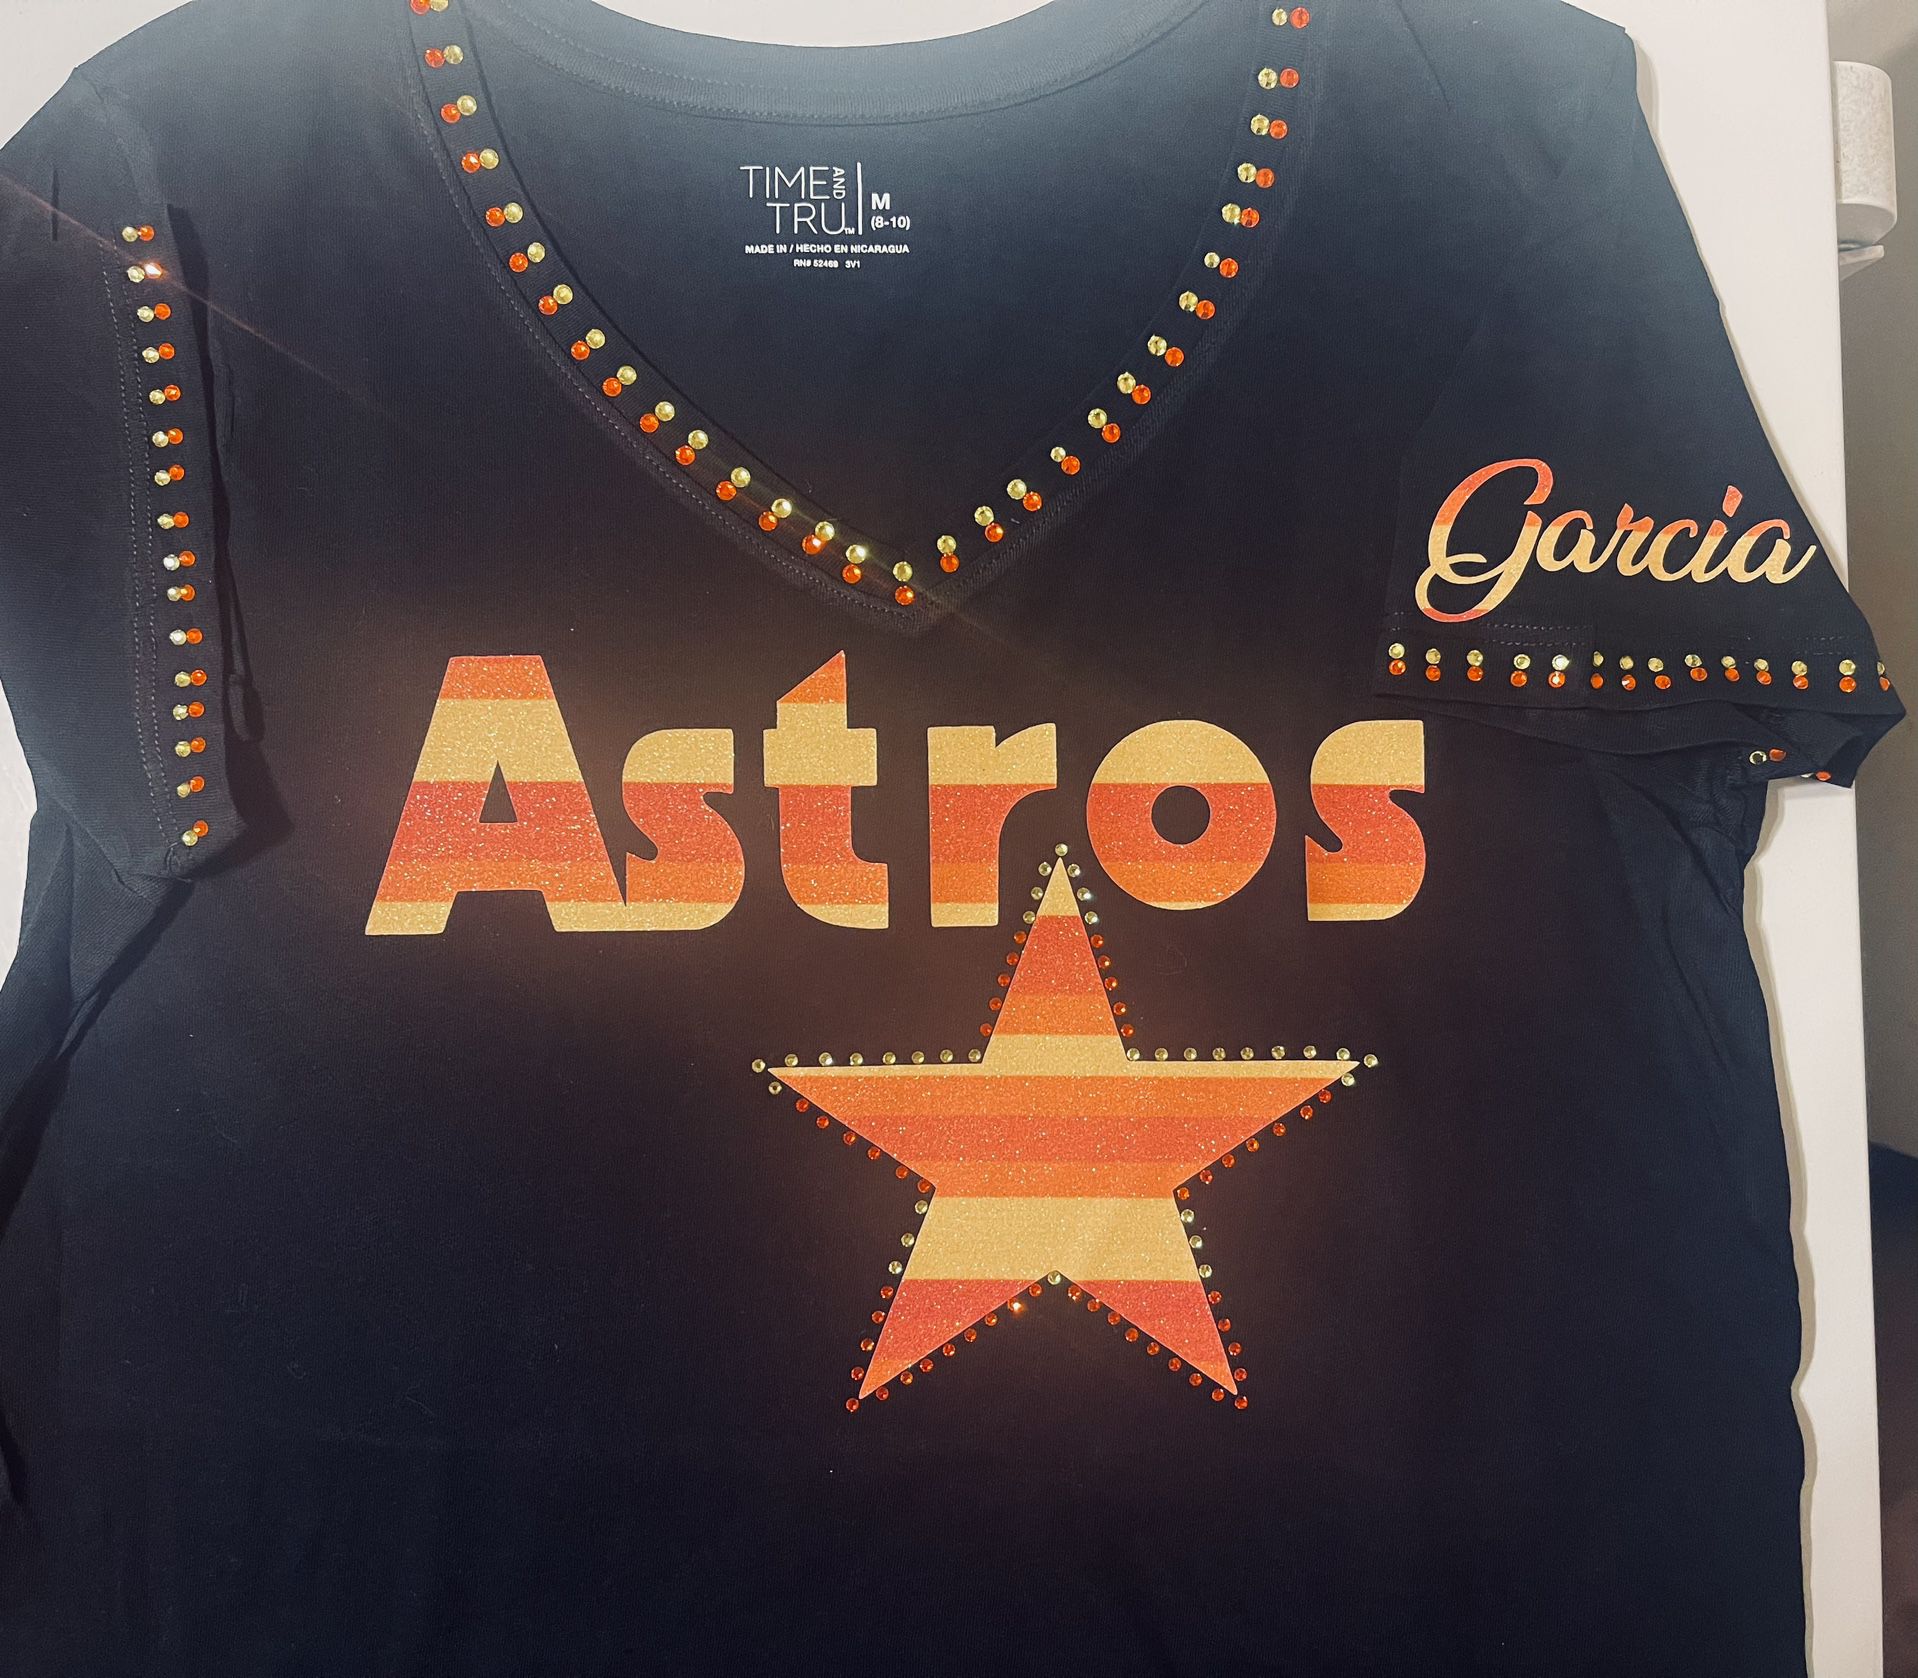 Astros Shirts for Sale in Houston, TX - OfferUp 